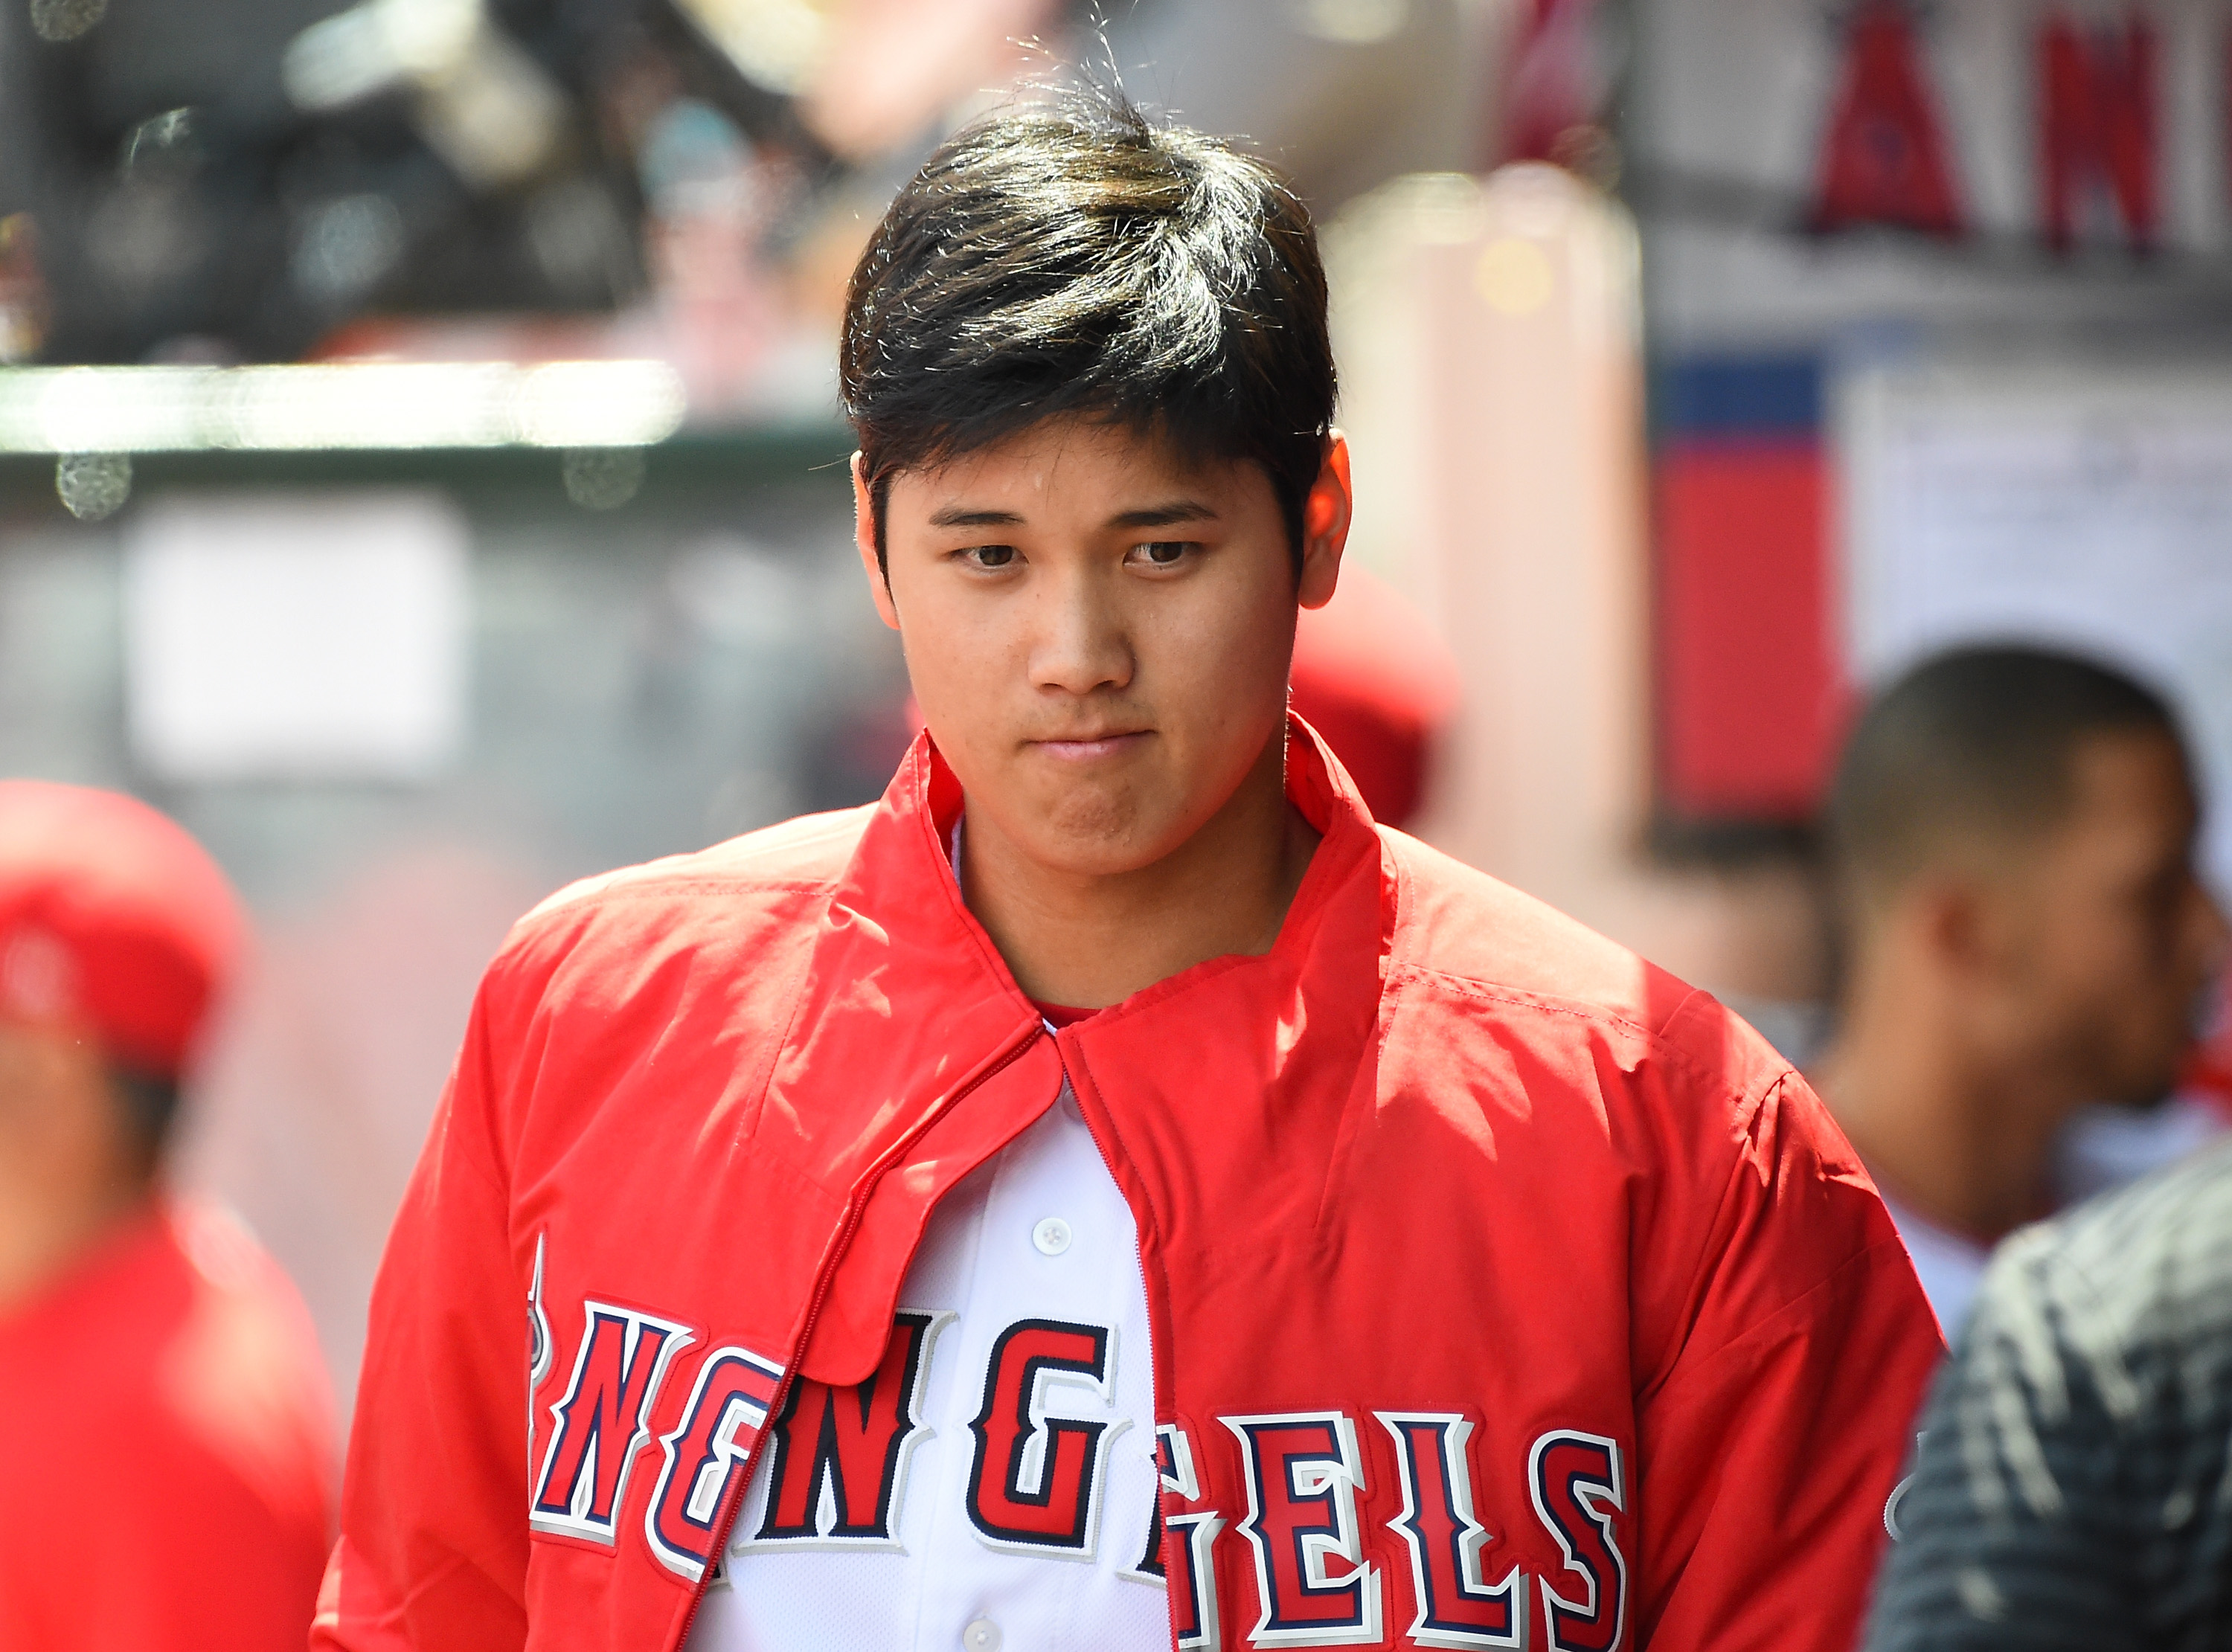 Shohei Ohtani Could Be on His Way to Producing MLB's BestEver